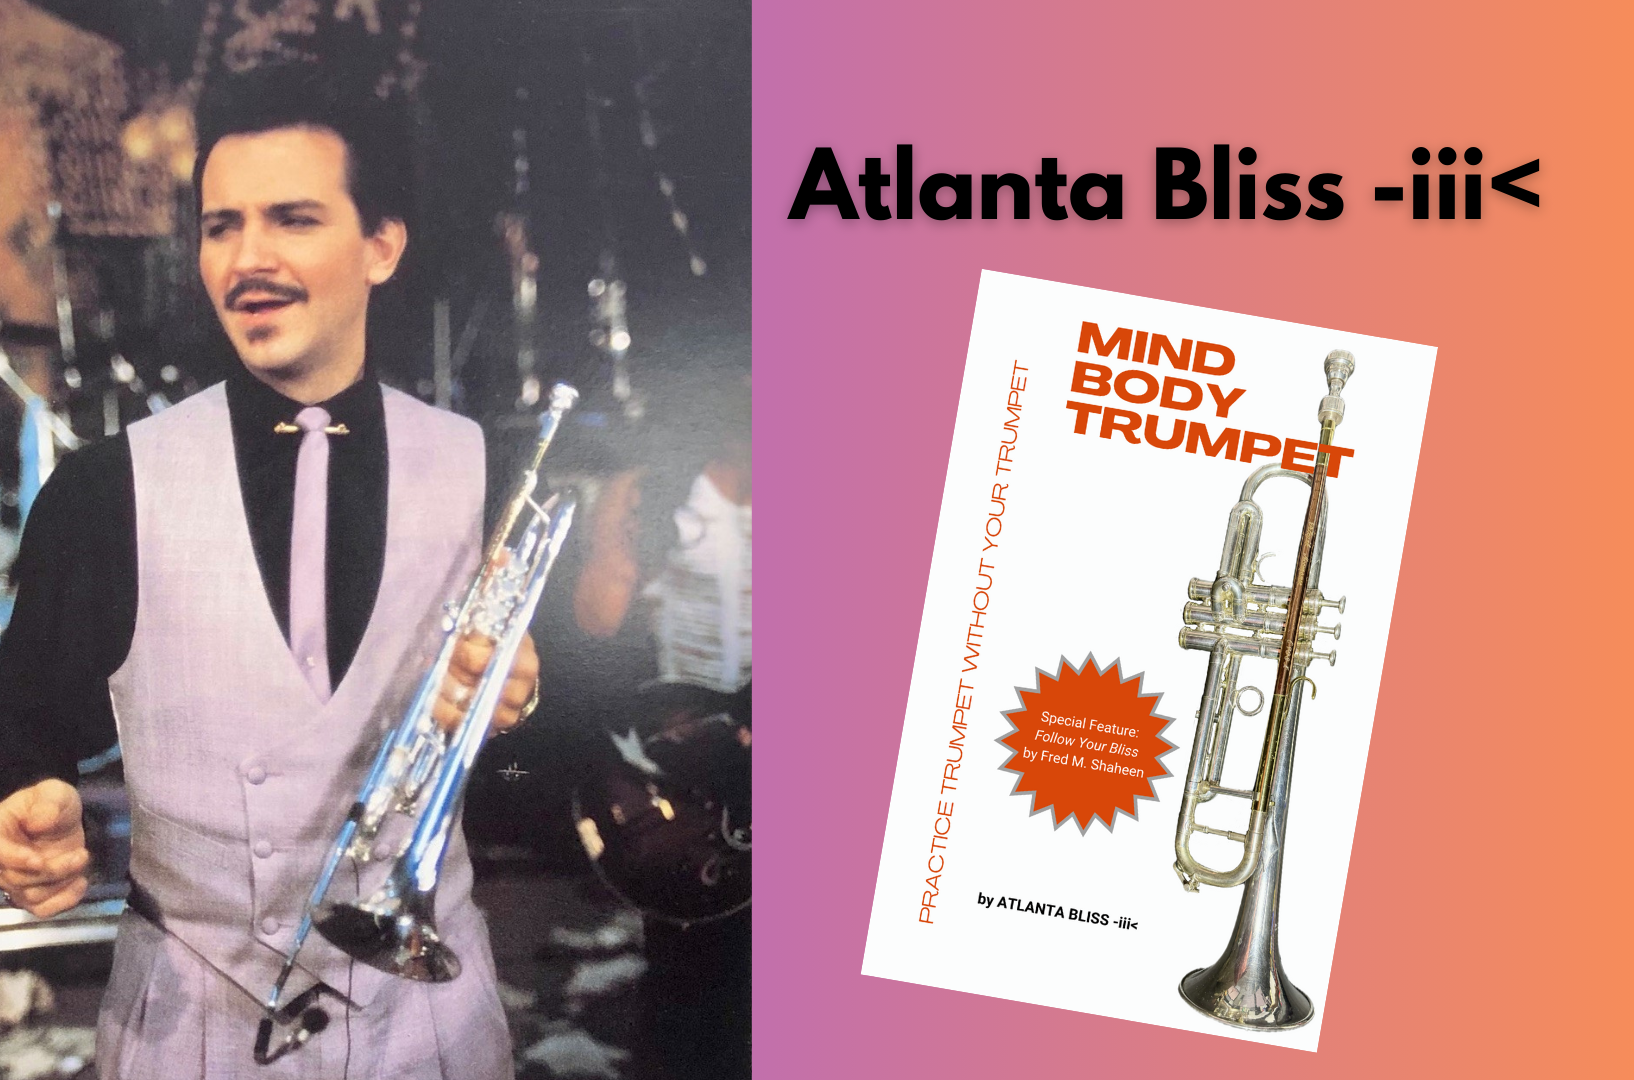 Cover image of Atlanta Bliss and the book Mind Body Trumpet